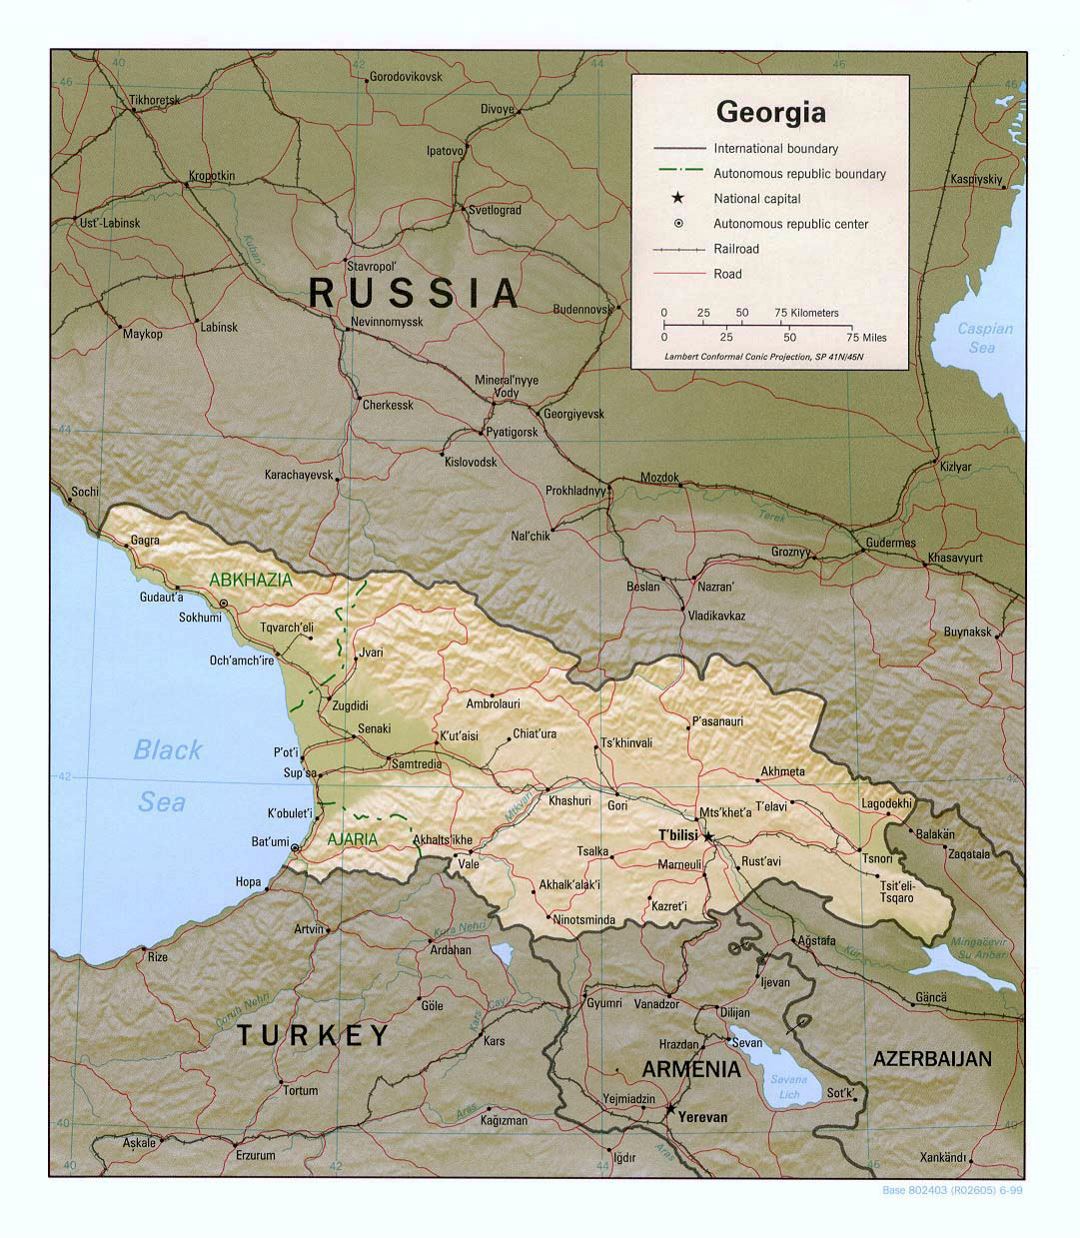 Detailed political map of Georgia with relief, roads, railroads and major cities - 1999